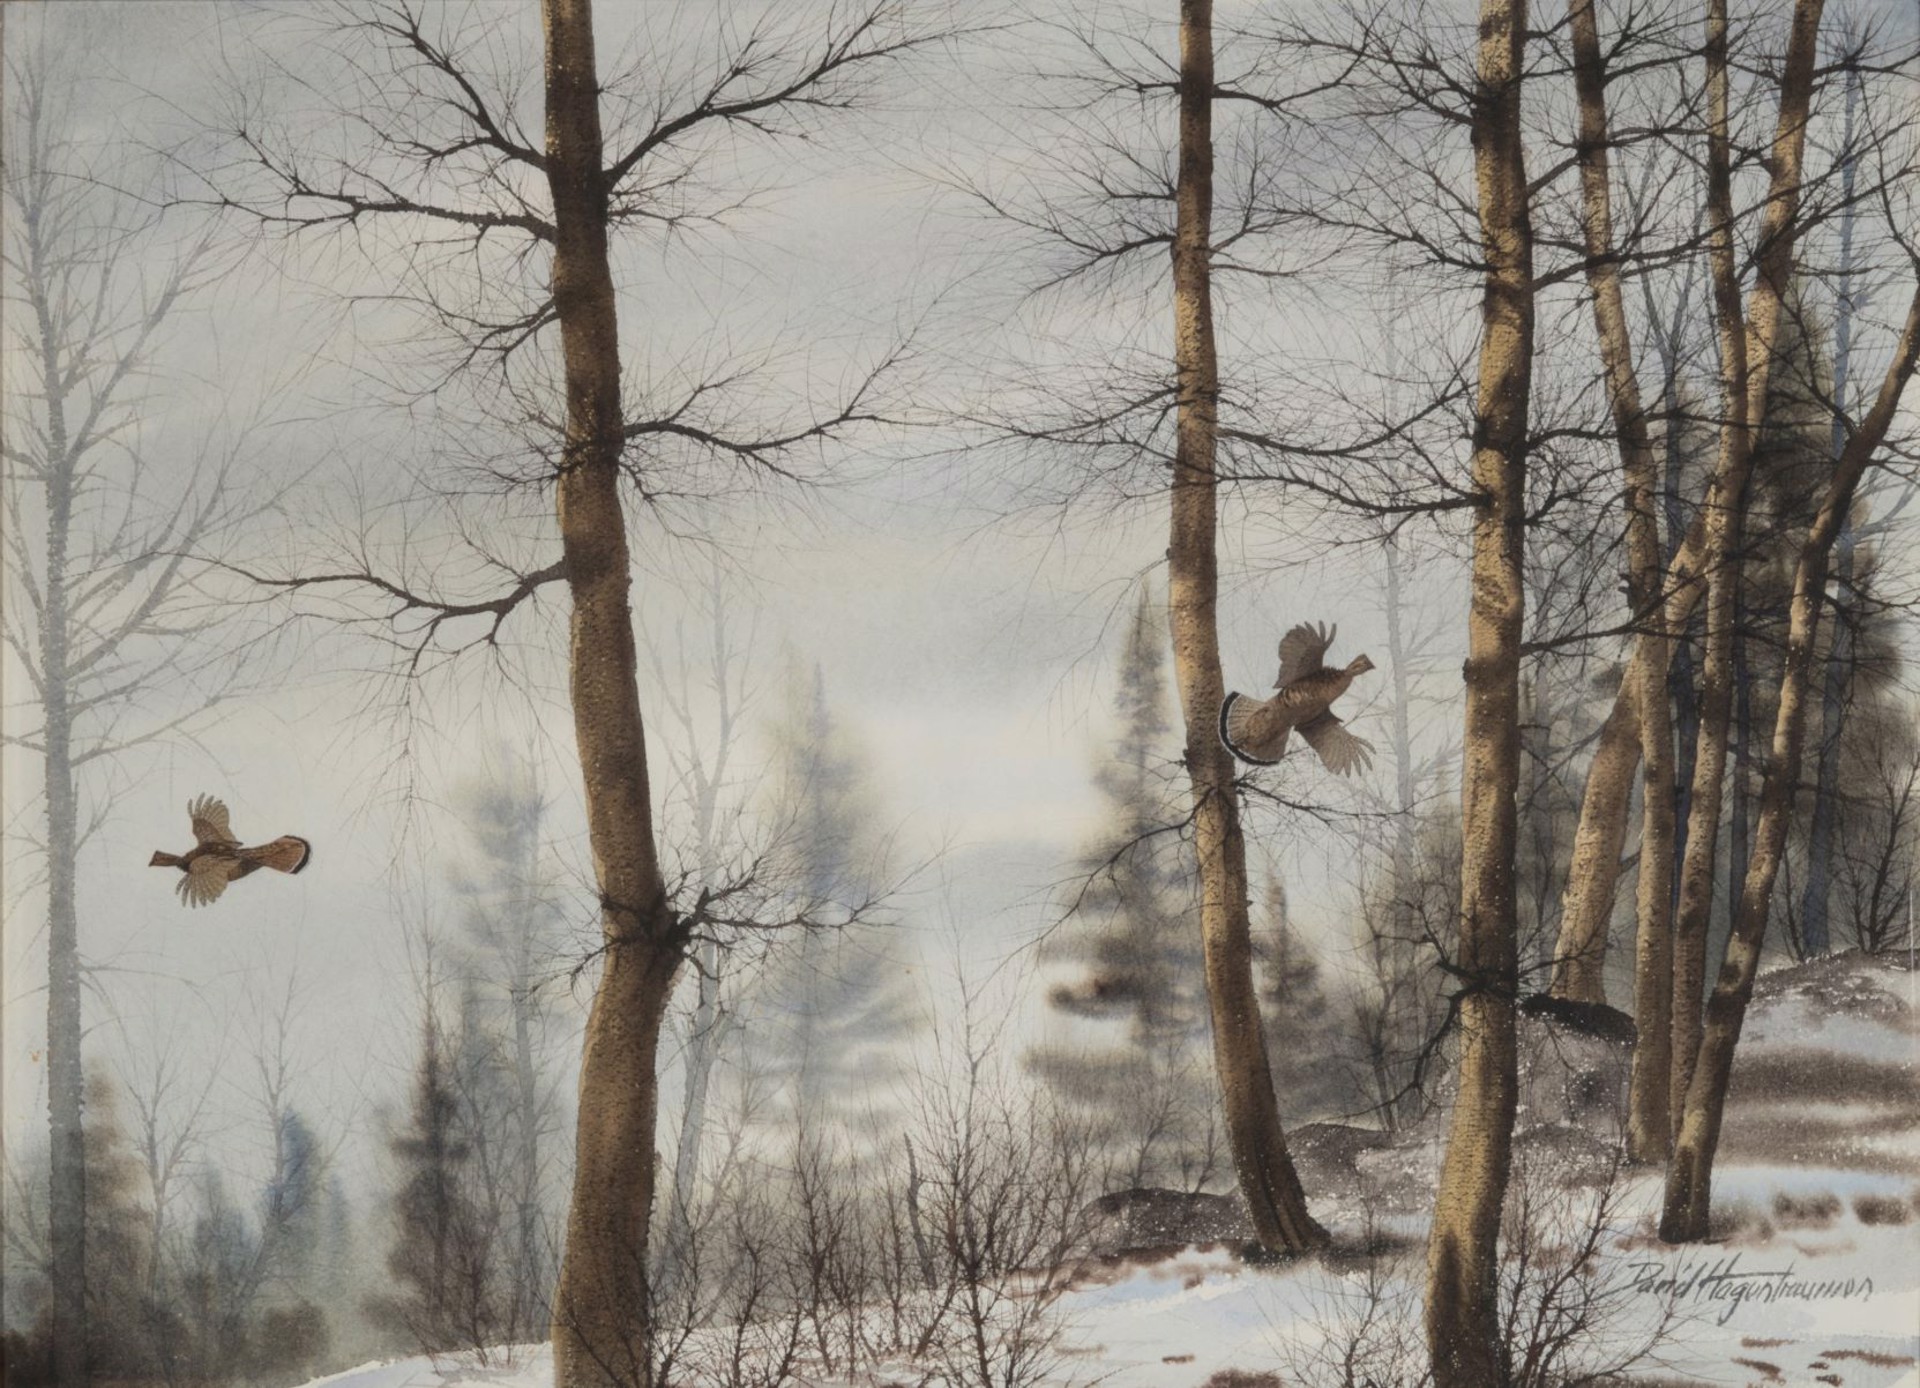 Grouse in Winter by David Hagerbaumer